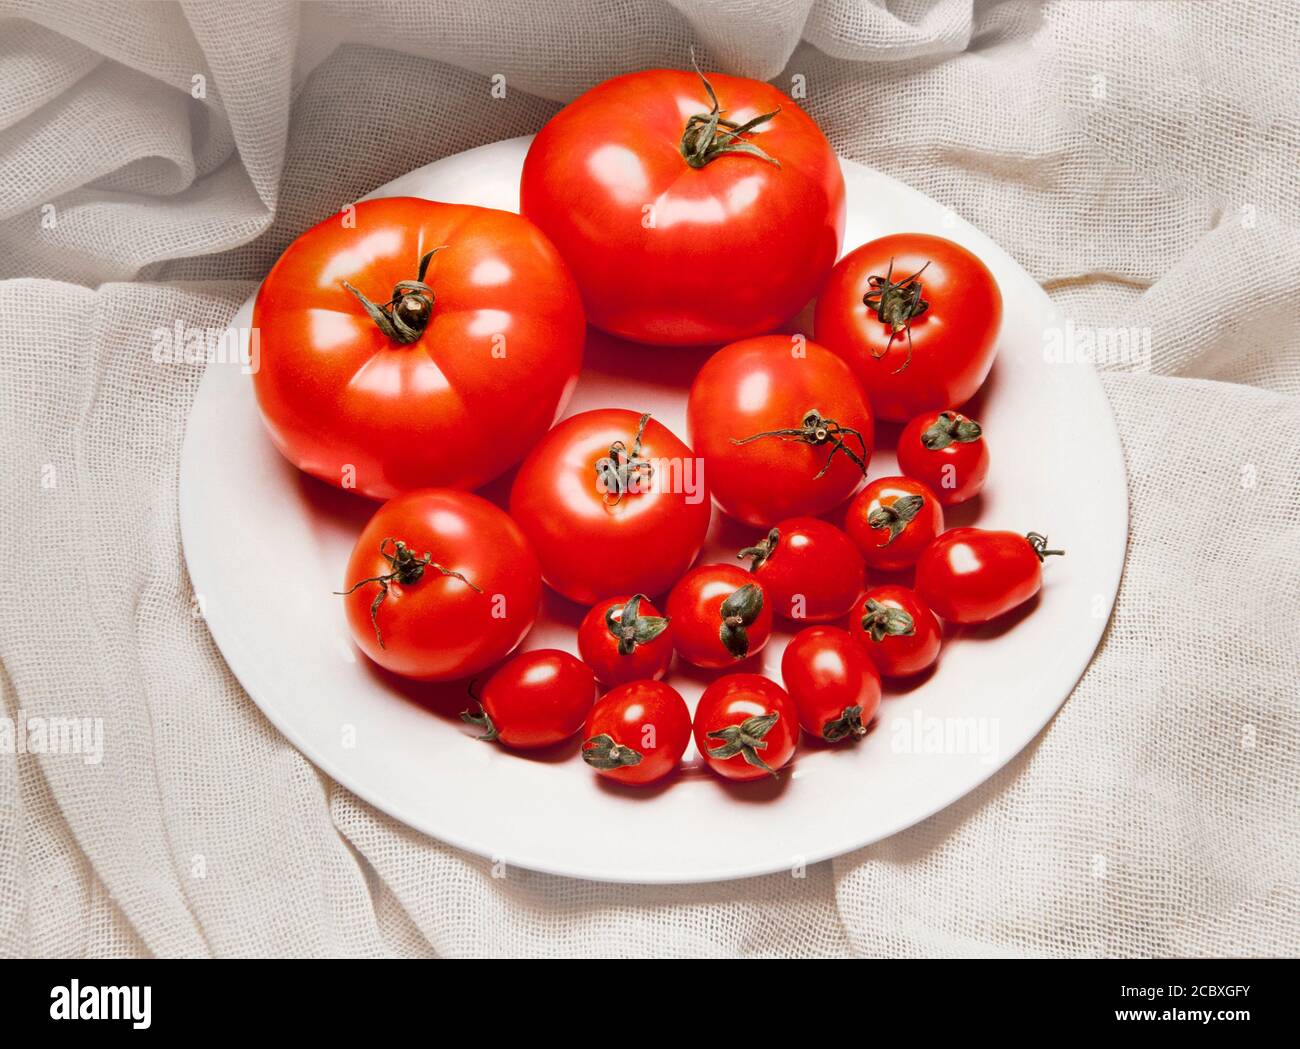 Tomato variety size selection on a white plate Stock Photo